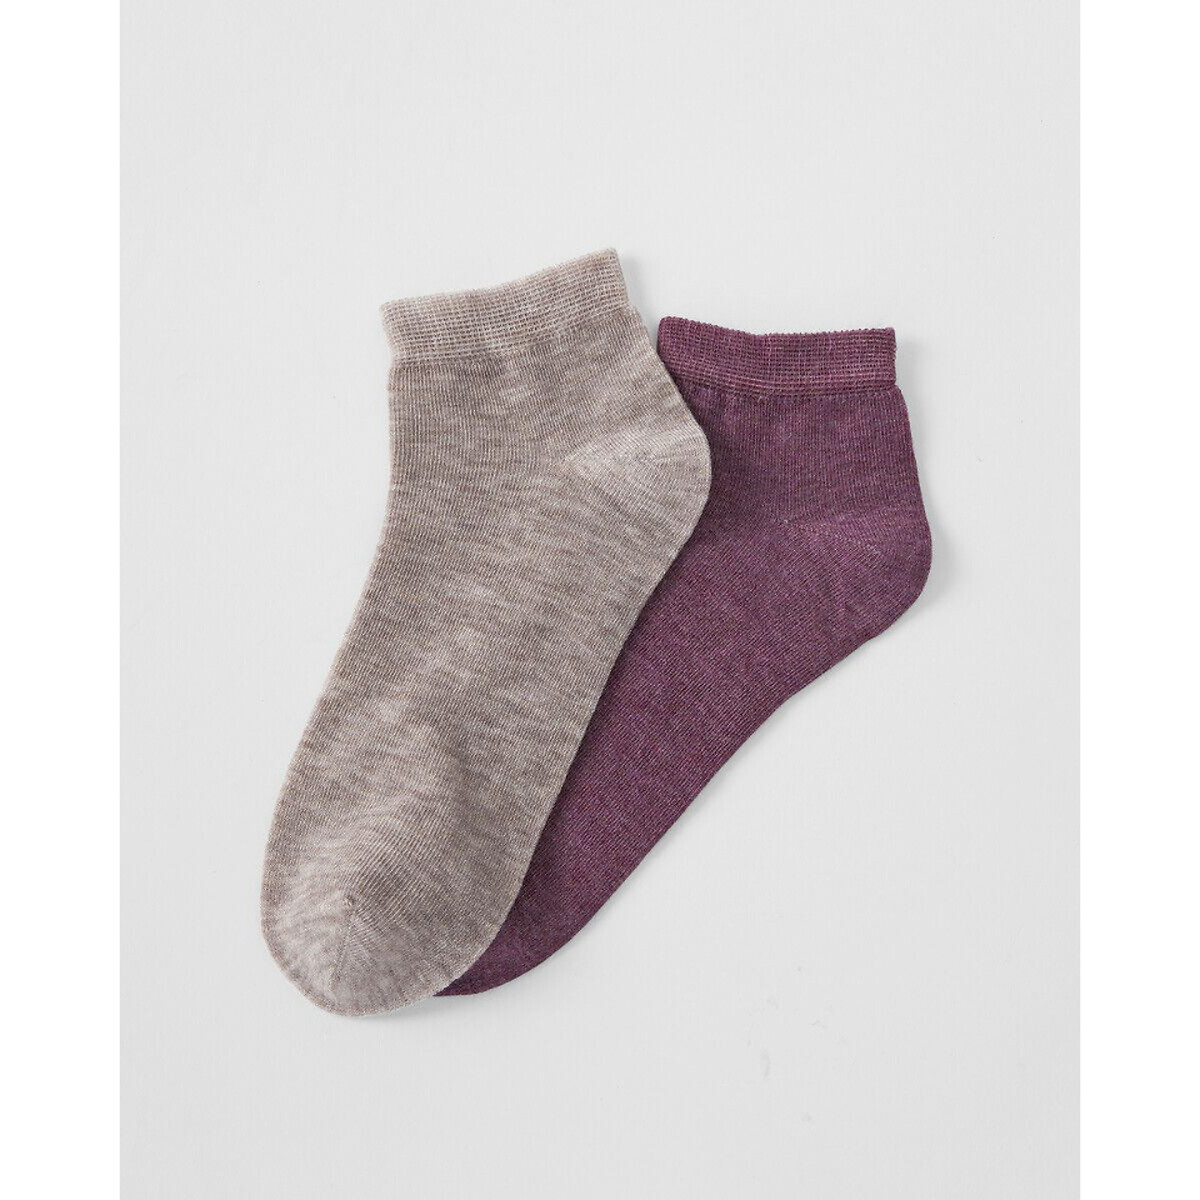 pack of 2 pairs of climatyl socks